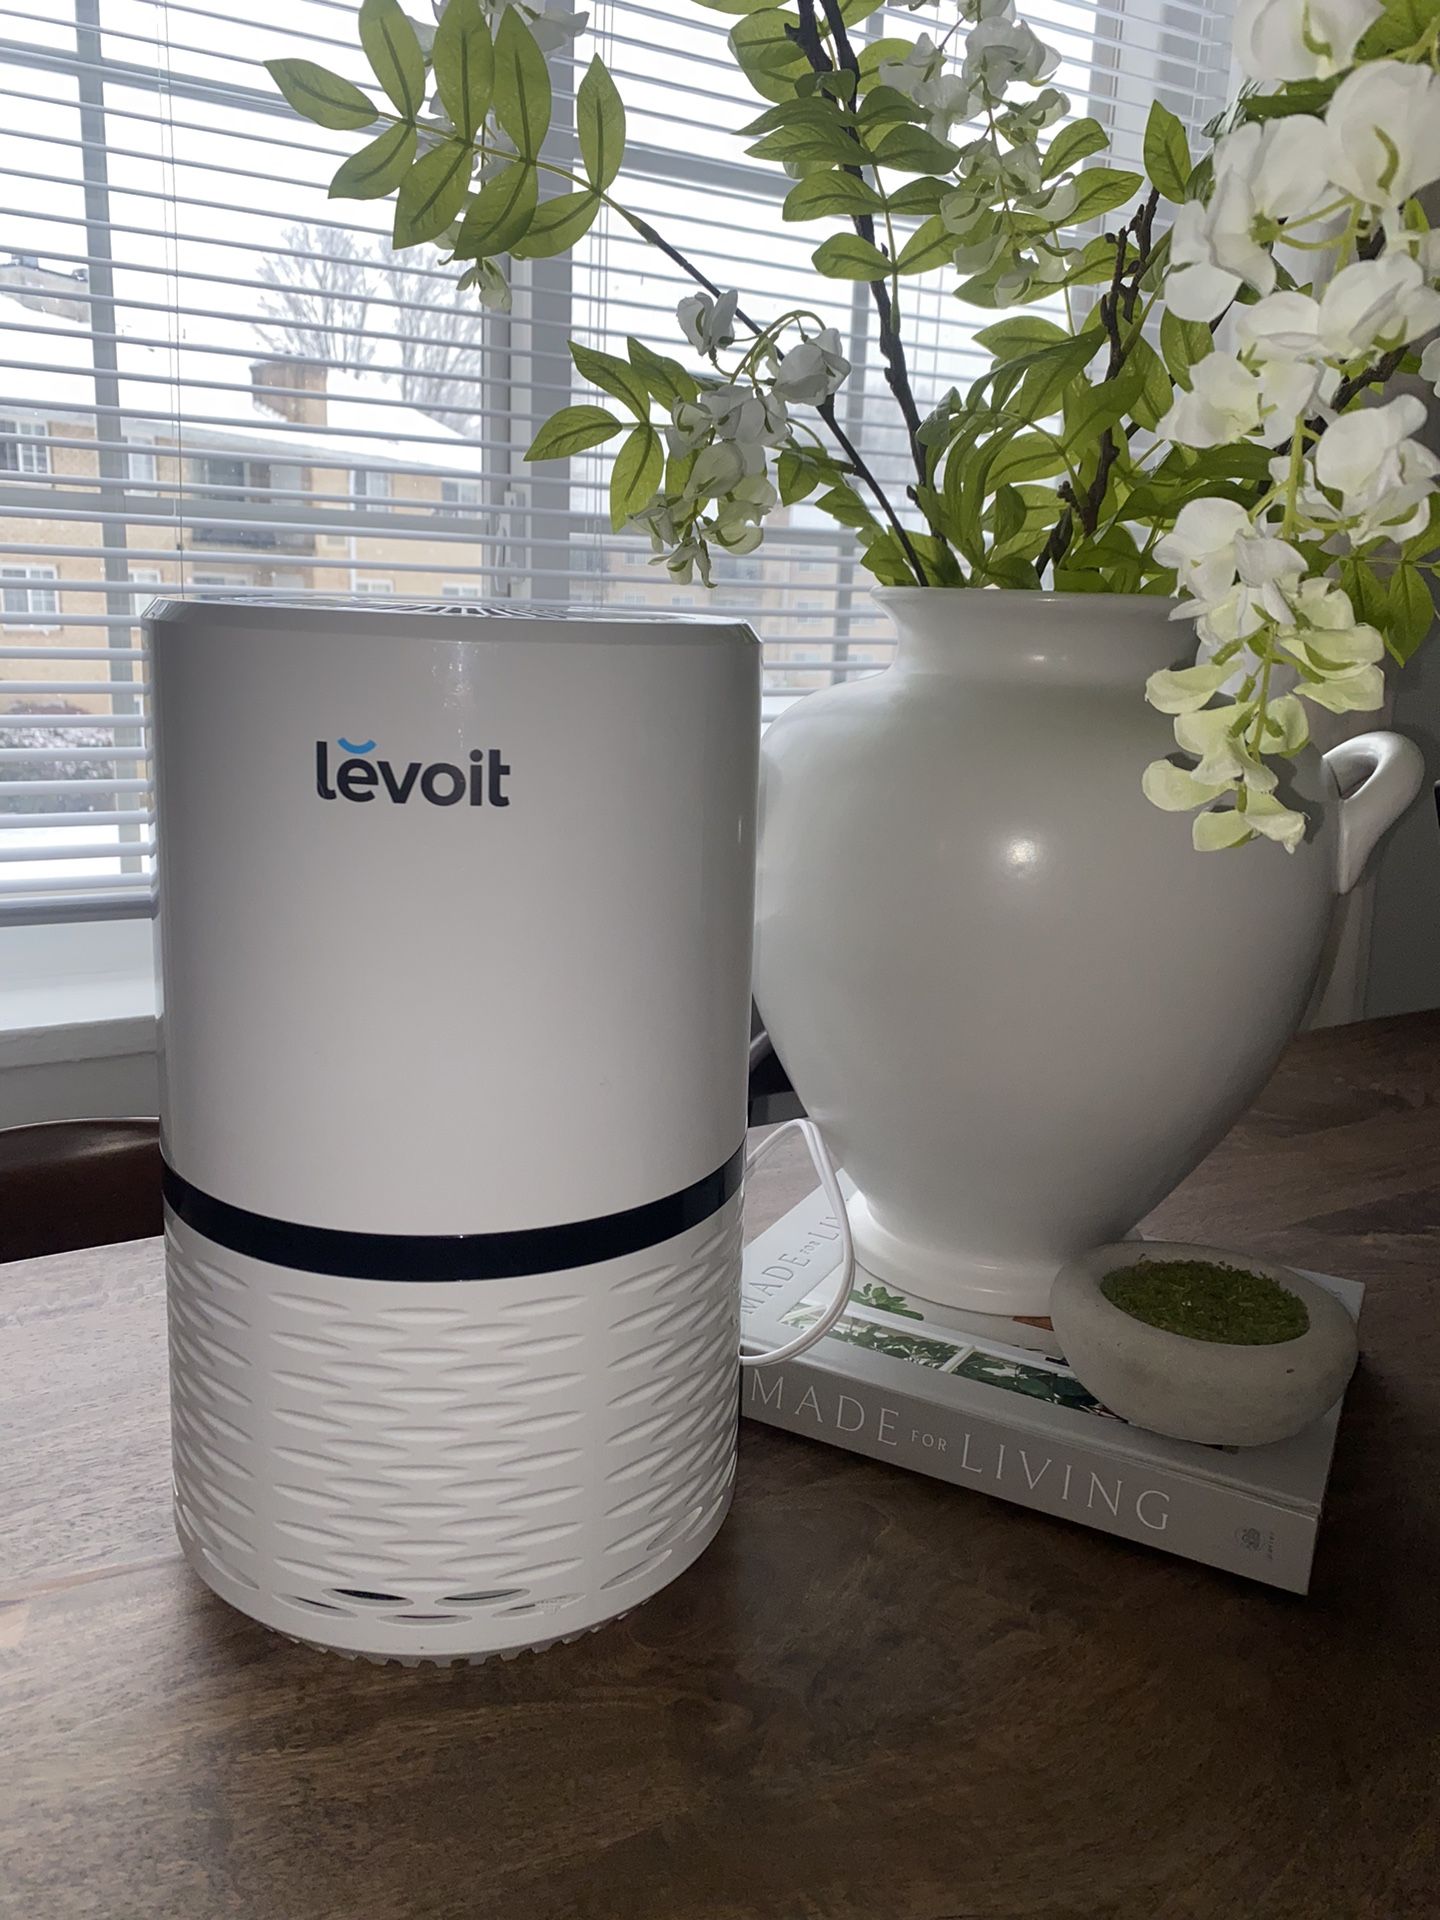 Levoit - Aerone 129 Sq. Ft True HEPA Air Purifier with Filter - White